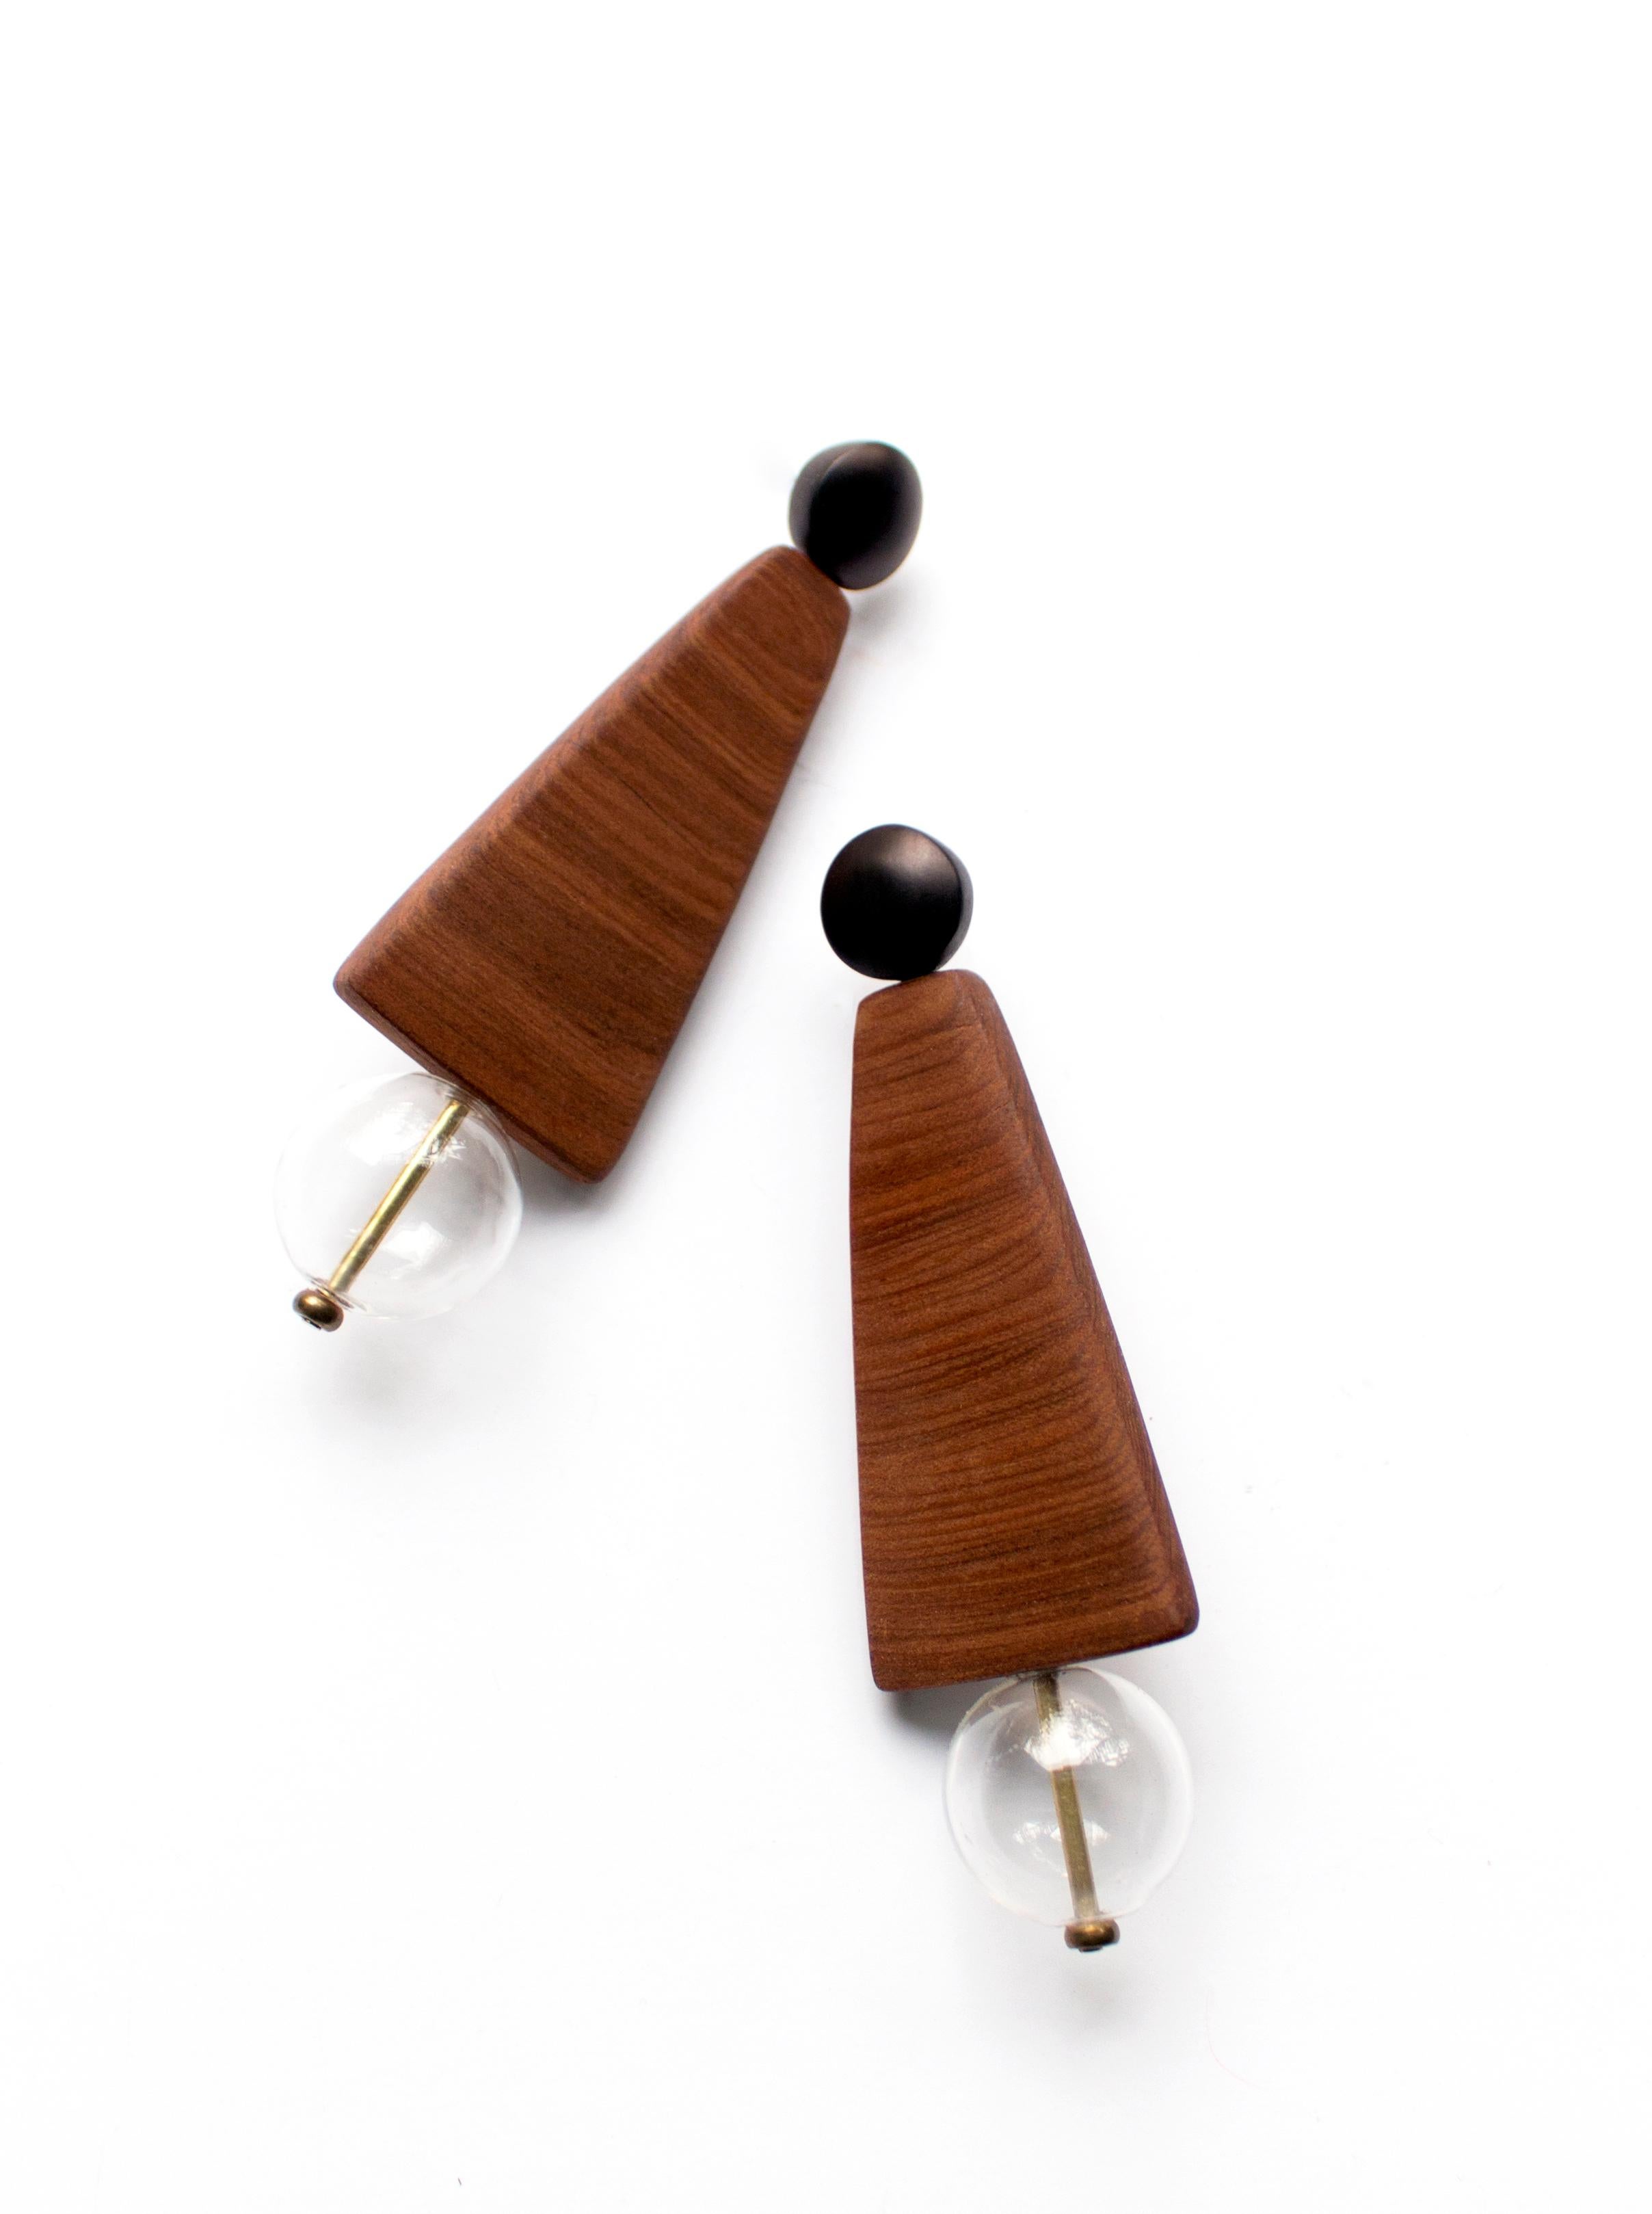 Hand-carved reclaimed wood earrings inspired by mid-century artists such as George Nakashima.    
Rich grained black walnut wedges and affixed blown glass beads suspended from hardwood studs.  Hypoallergenic stainless steel posts. 

All Hola Luna